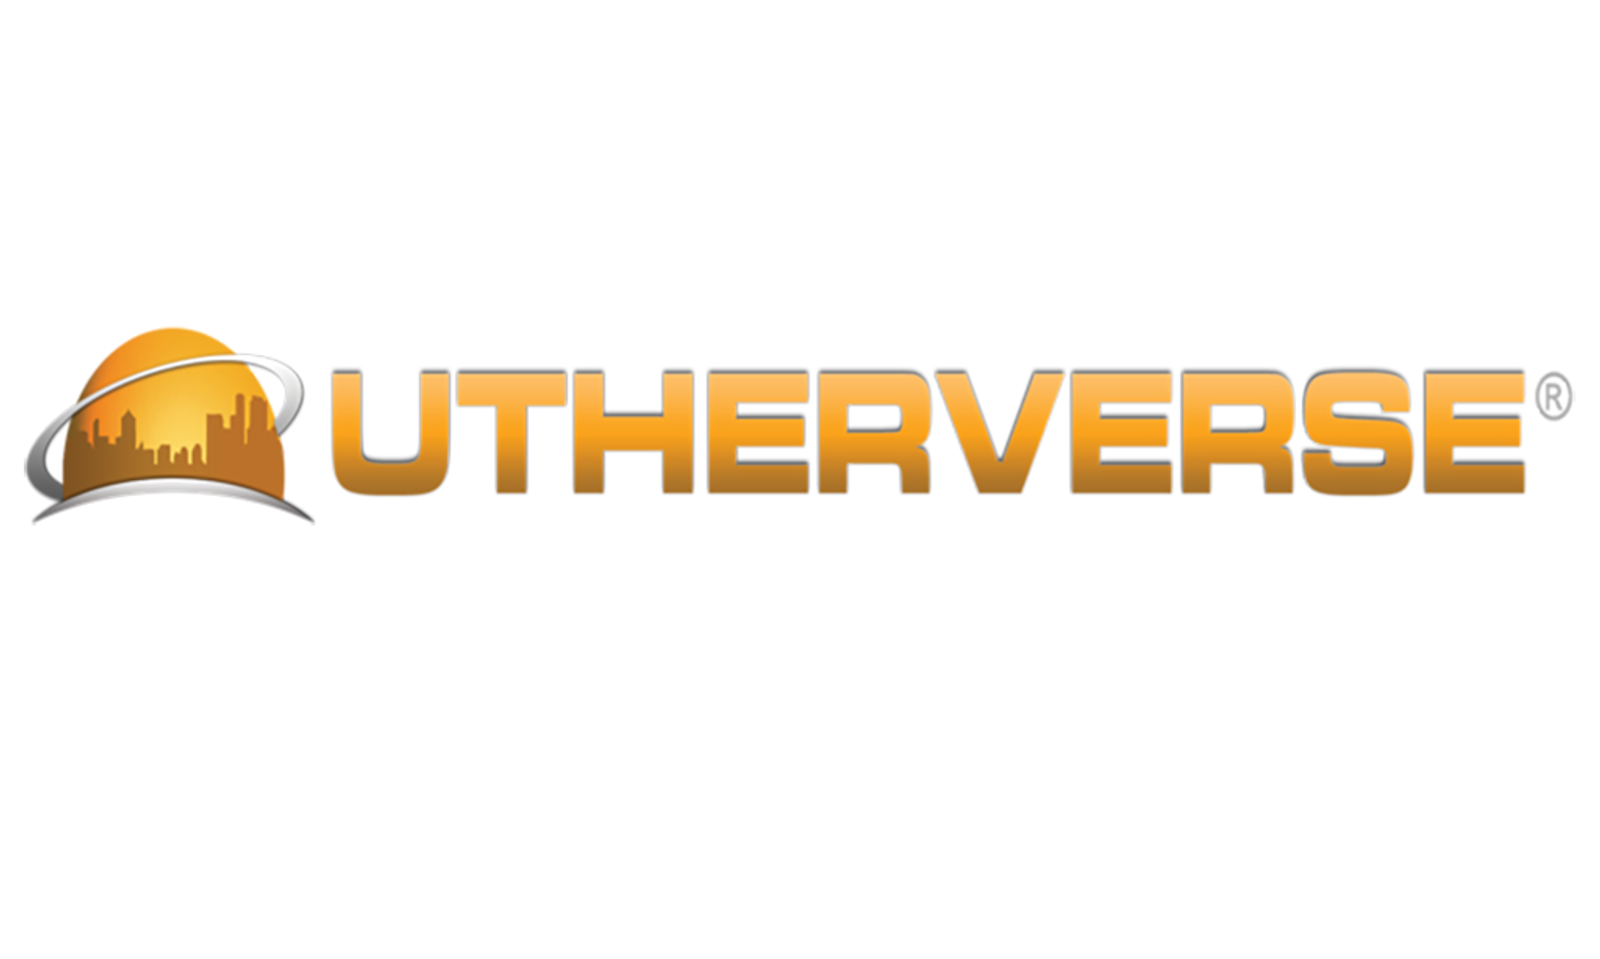 Celebrate St. Paddy’s Day & Other Social Events On Utherverse